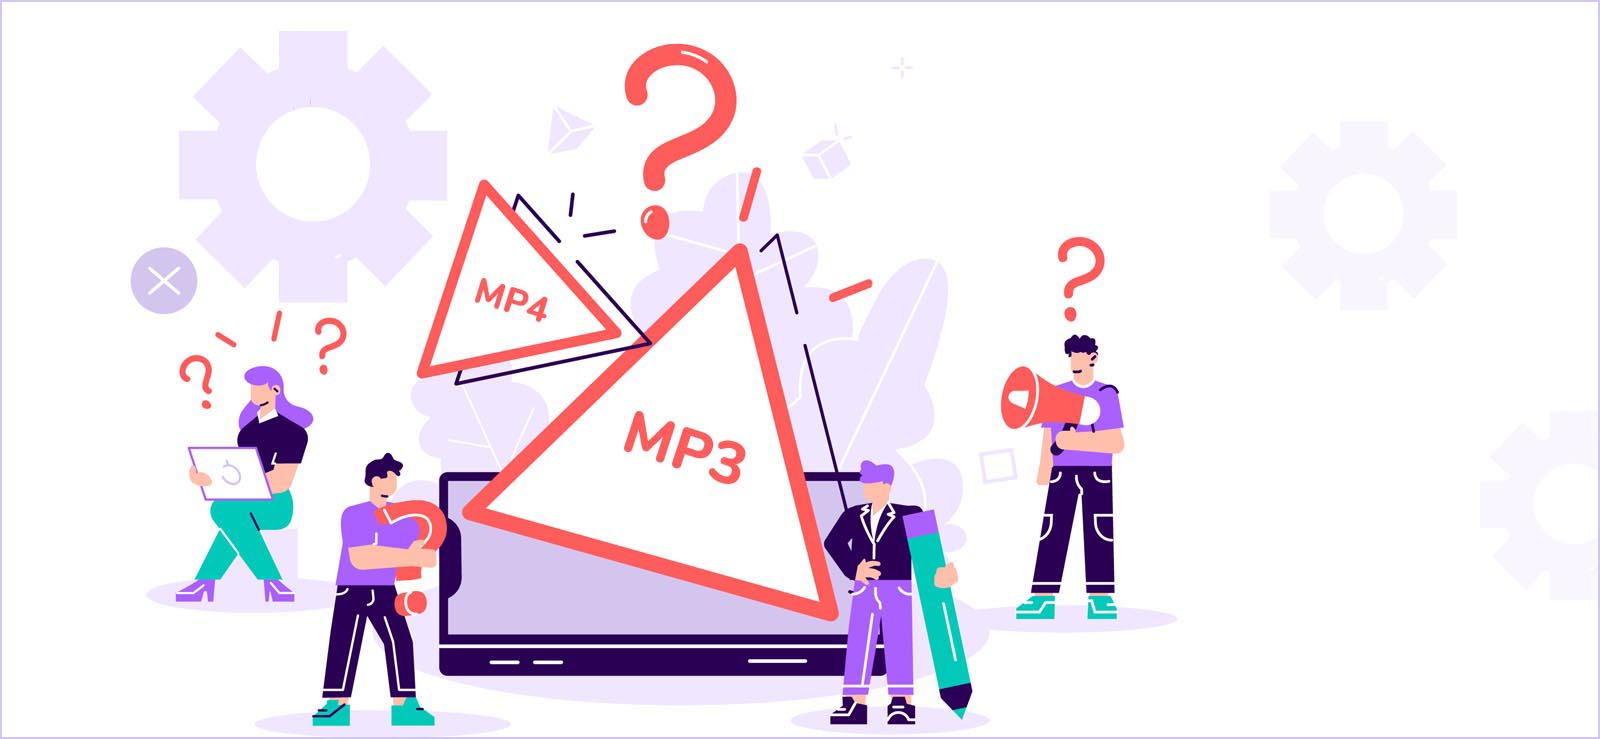 How to Convert MP4 to MP3?